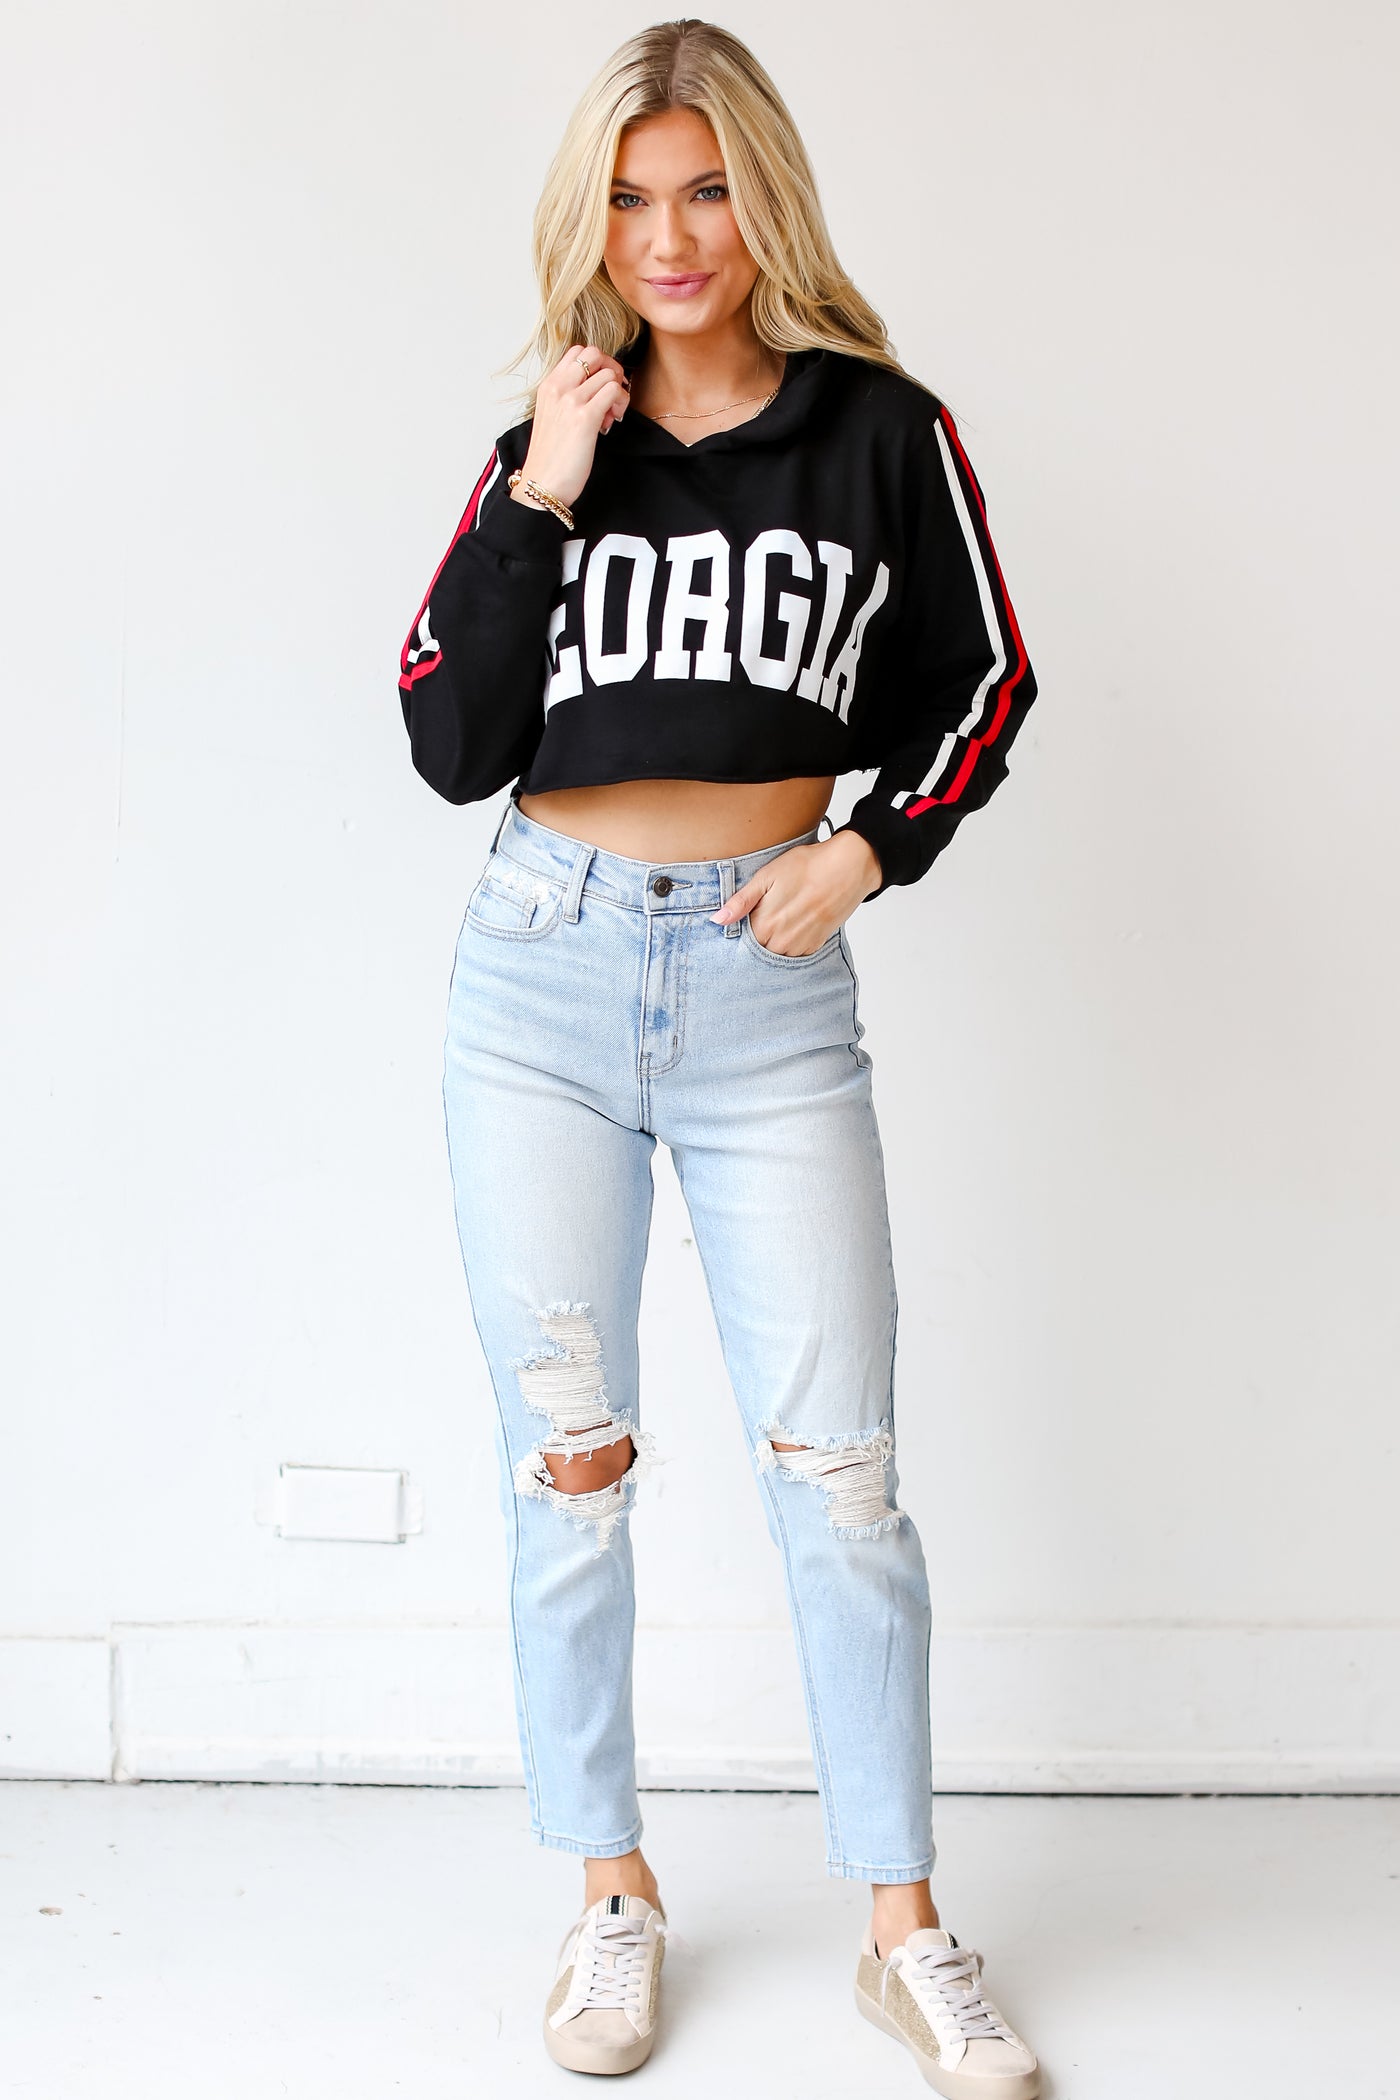 Black Georgia Cropped Hoodie with light wash jeans